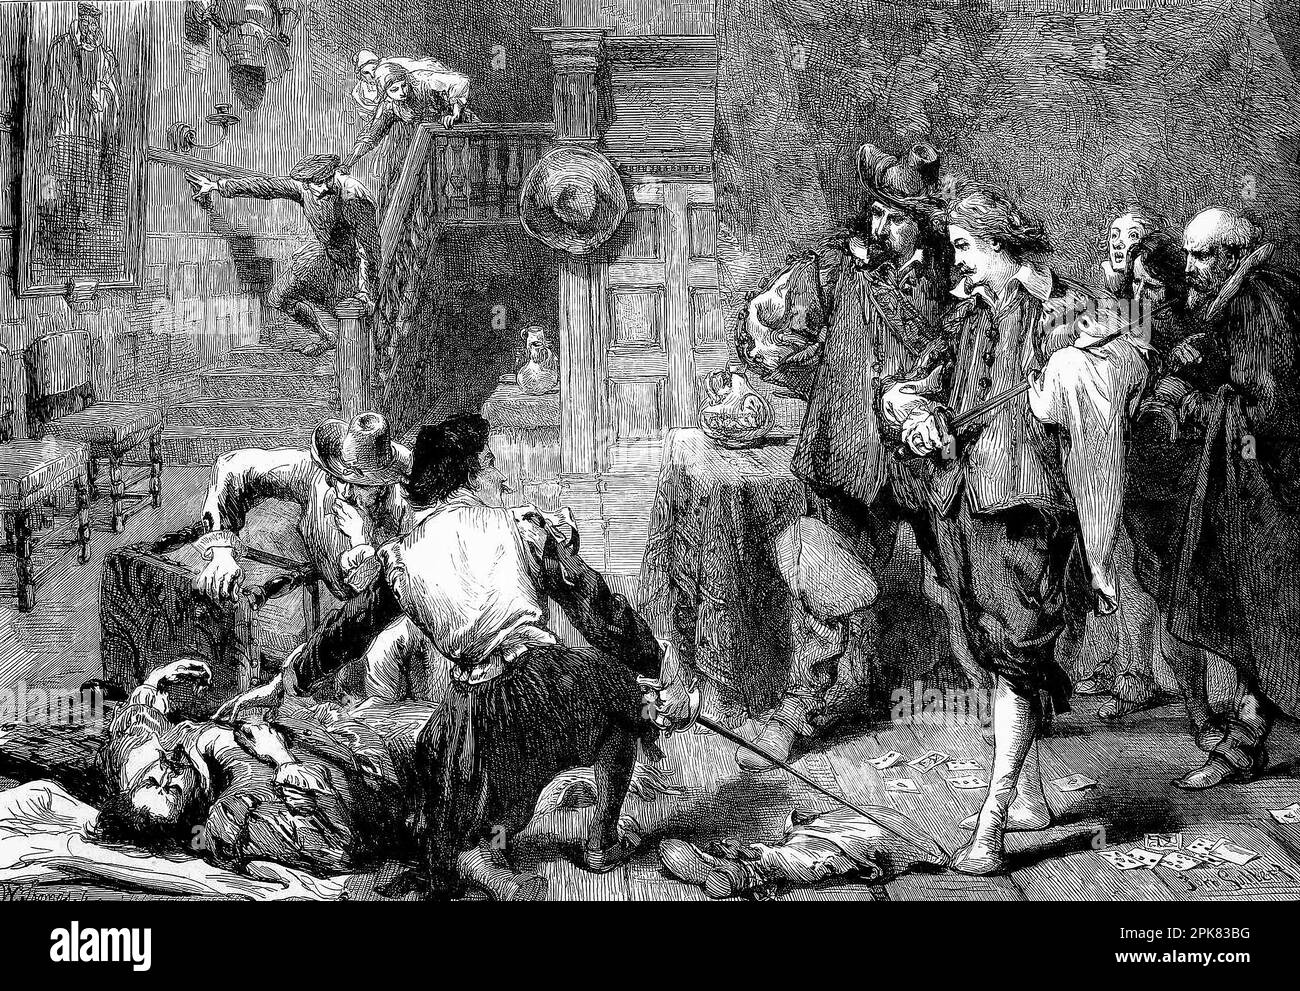 Sir John Gilbert's (1817-1897) medieval illustration of brawl in a tavern following a card game. Stock Photo